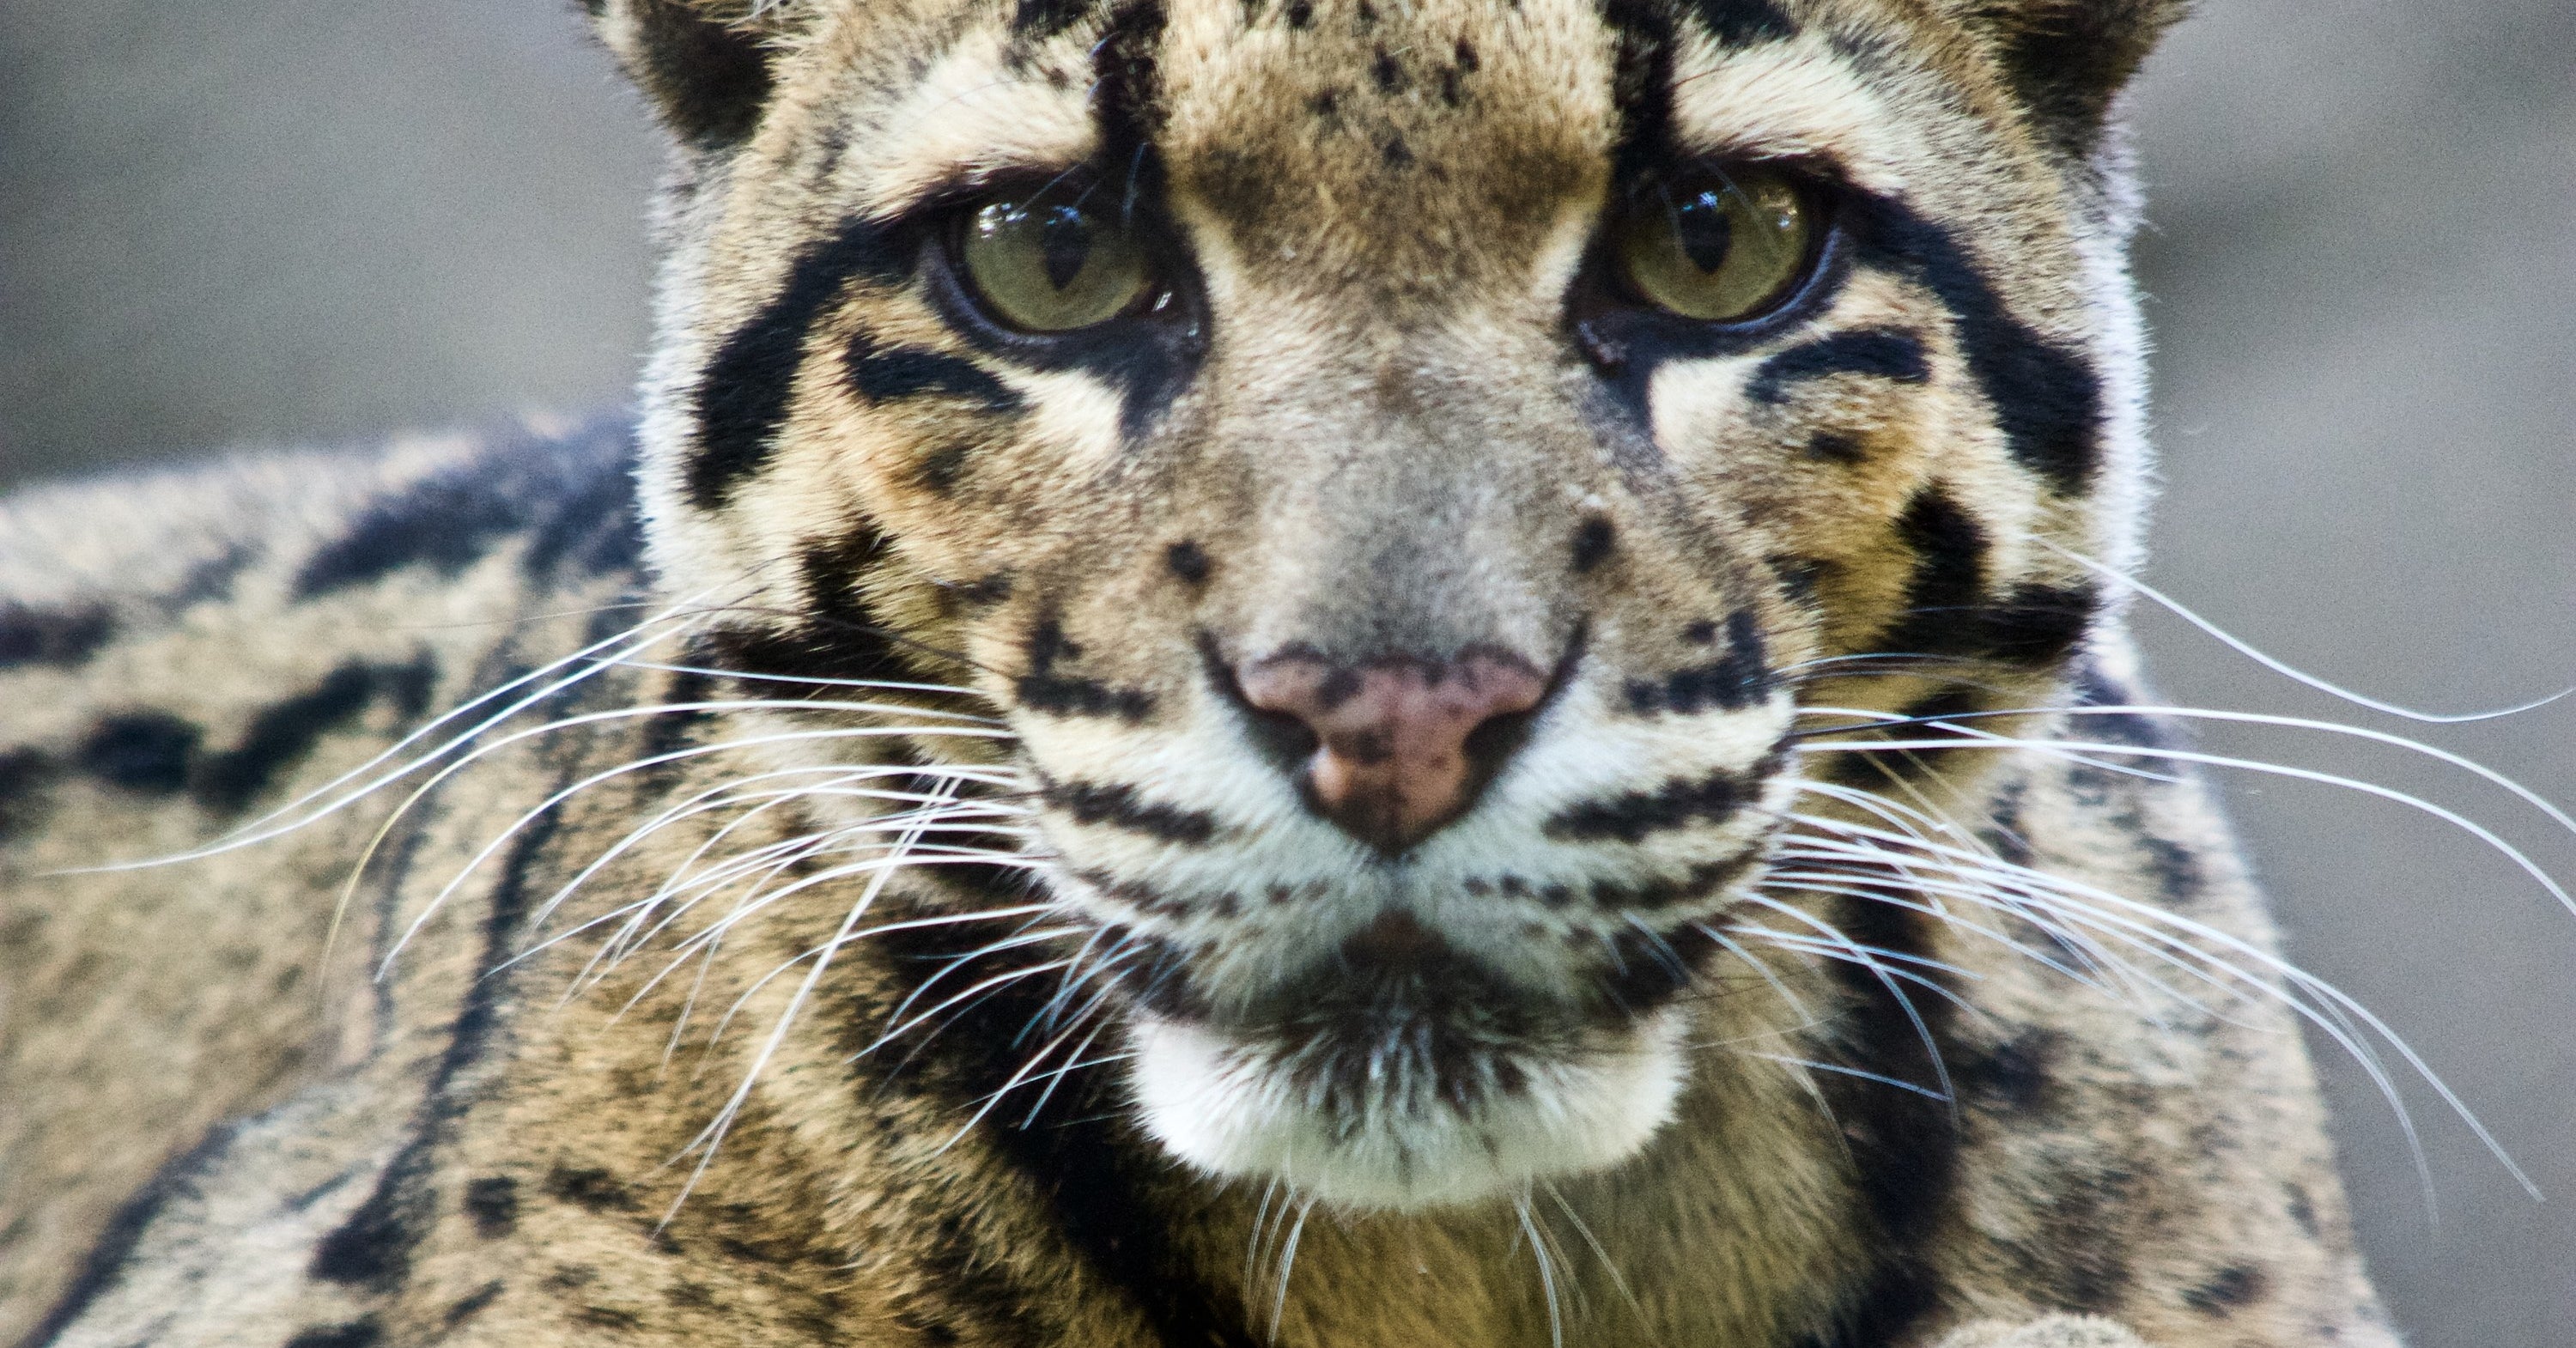 Missing Dallas Zoo Clouded Leopard Social Media Reactions